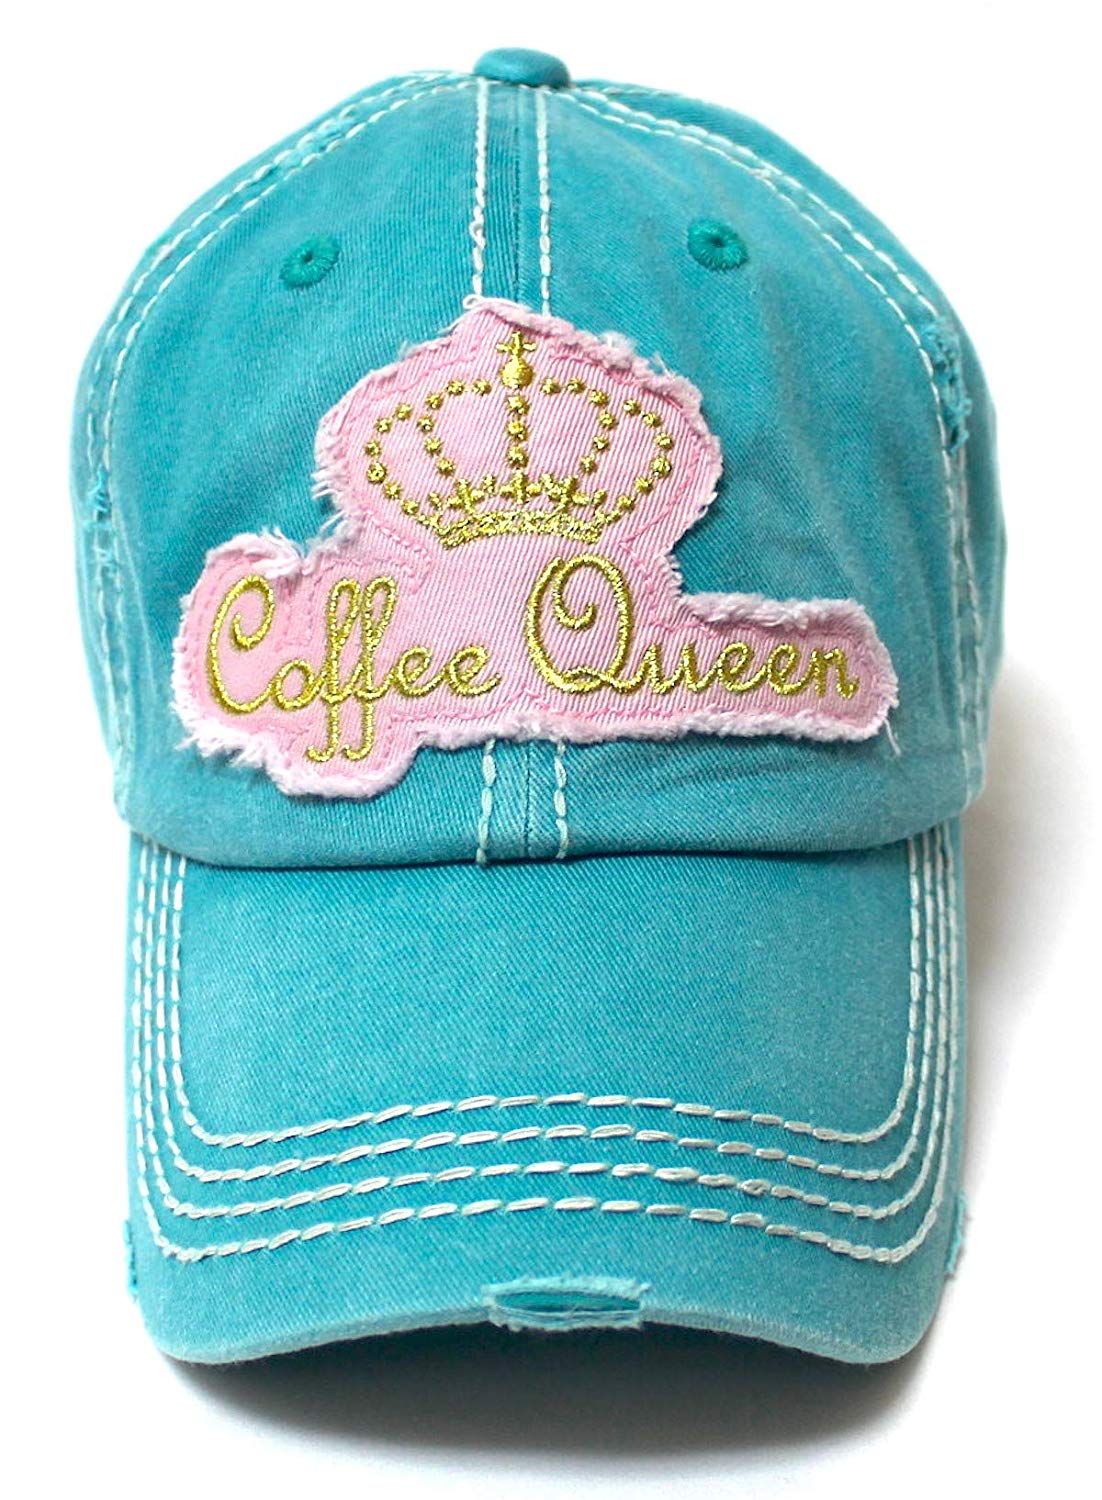 Women's Adjustable Ballcap Coffee Queen Royalty Patch Embroidery, Turquoise - Caps 'N Vintage 